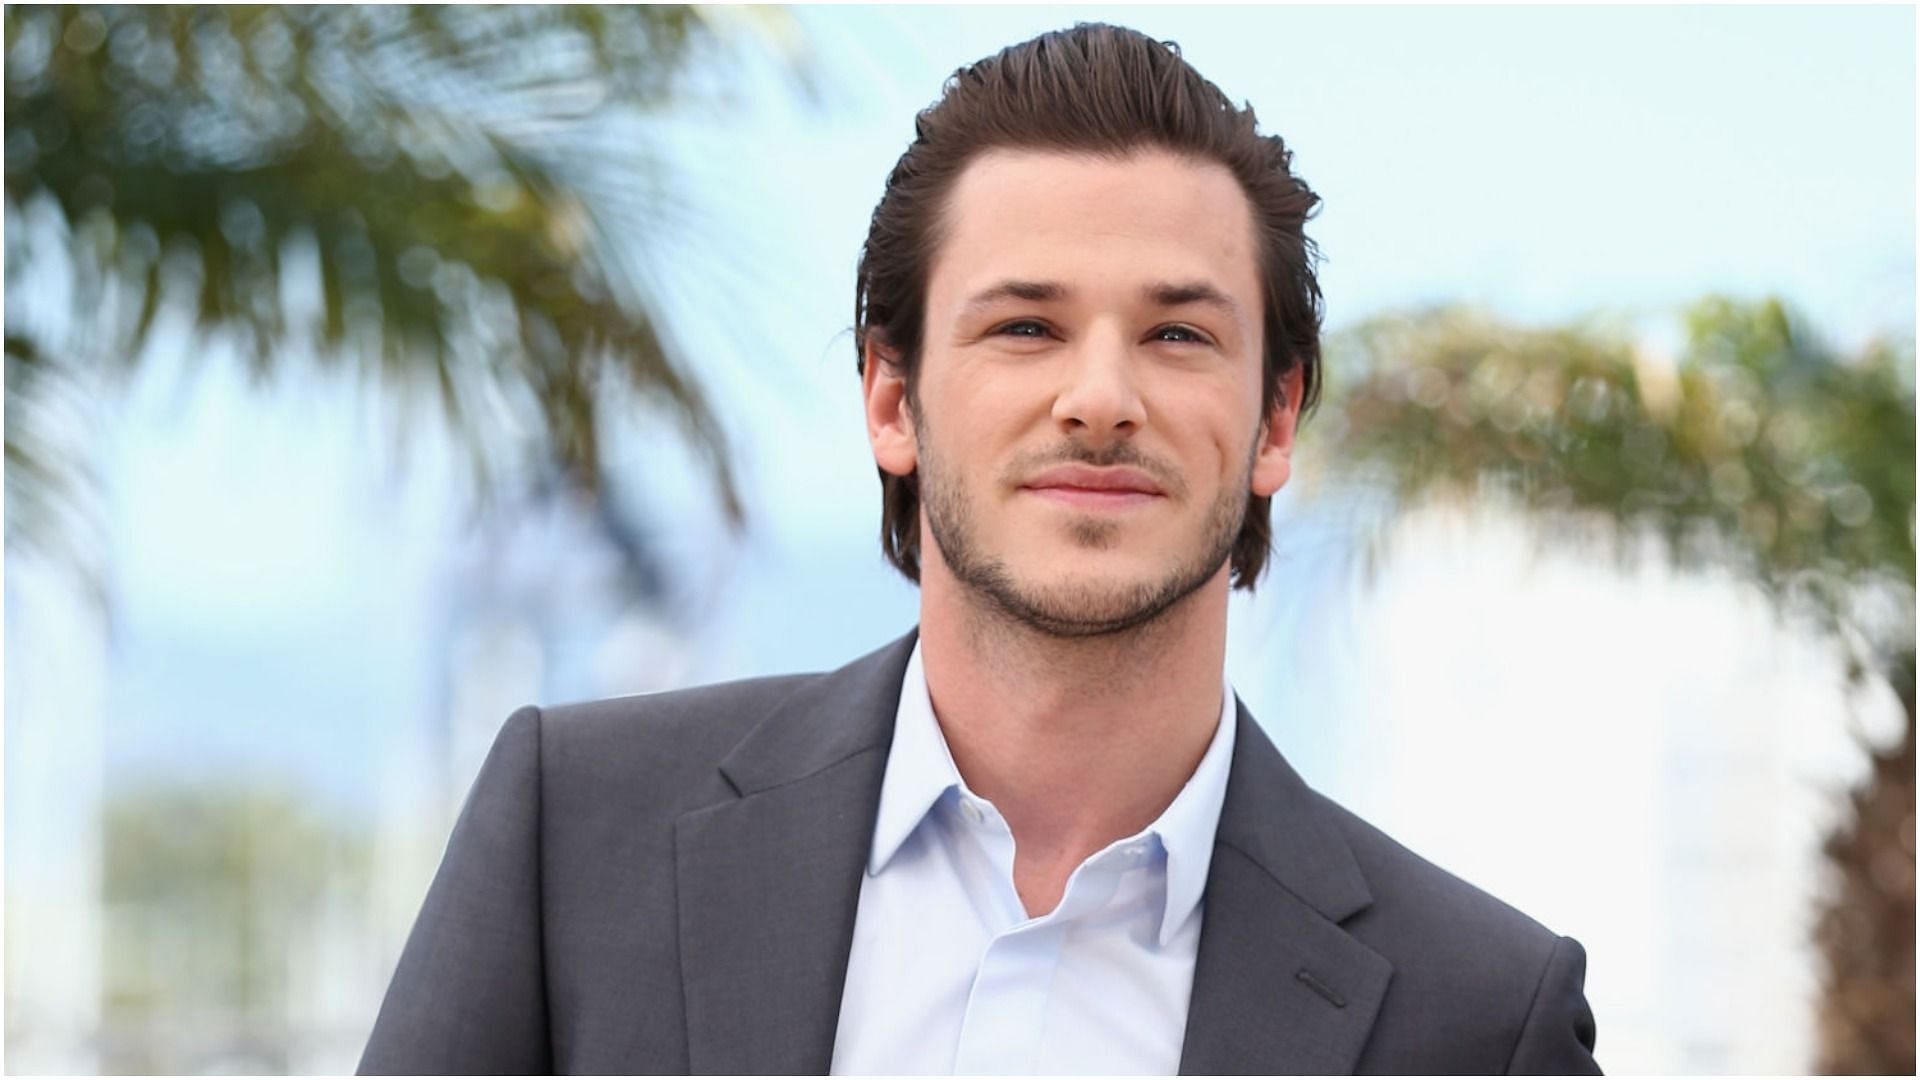 Gaspard Ulliel attends the &quot;Saint Laurent&quot; photocall during the 67th Annual Cannes Film Festival (Image via Andreas Rentz/Getty Images)